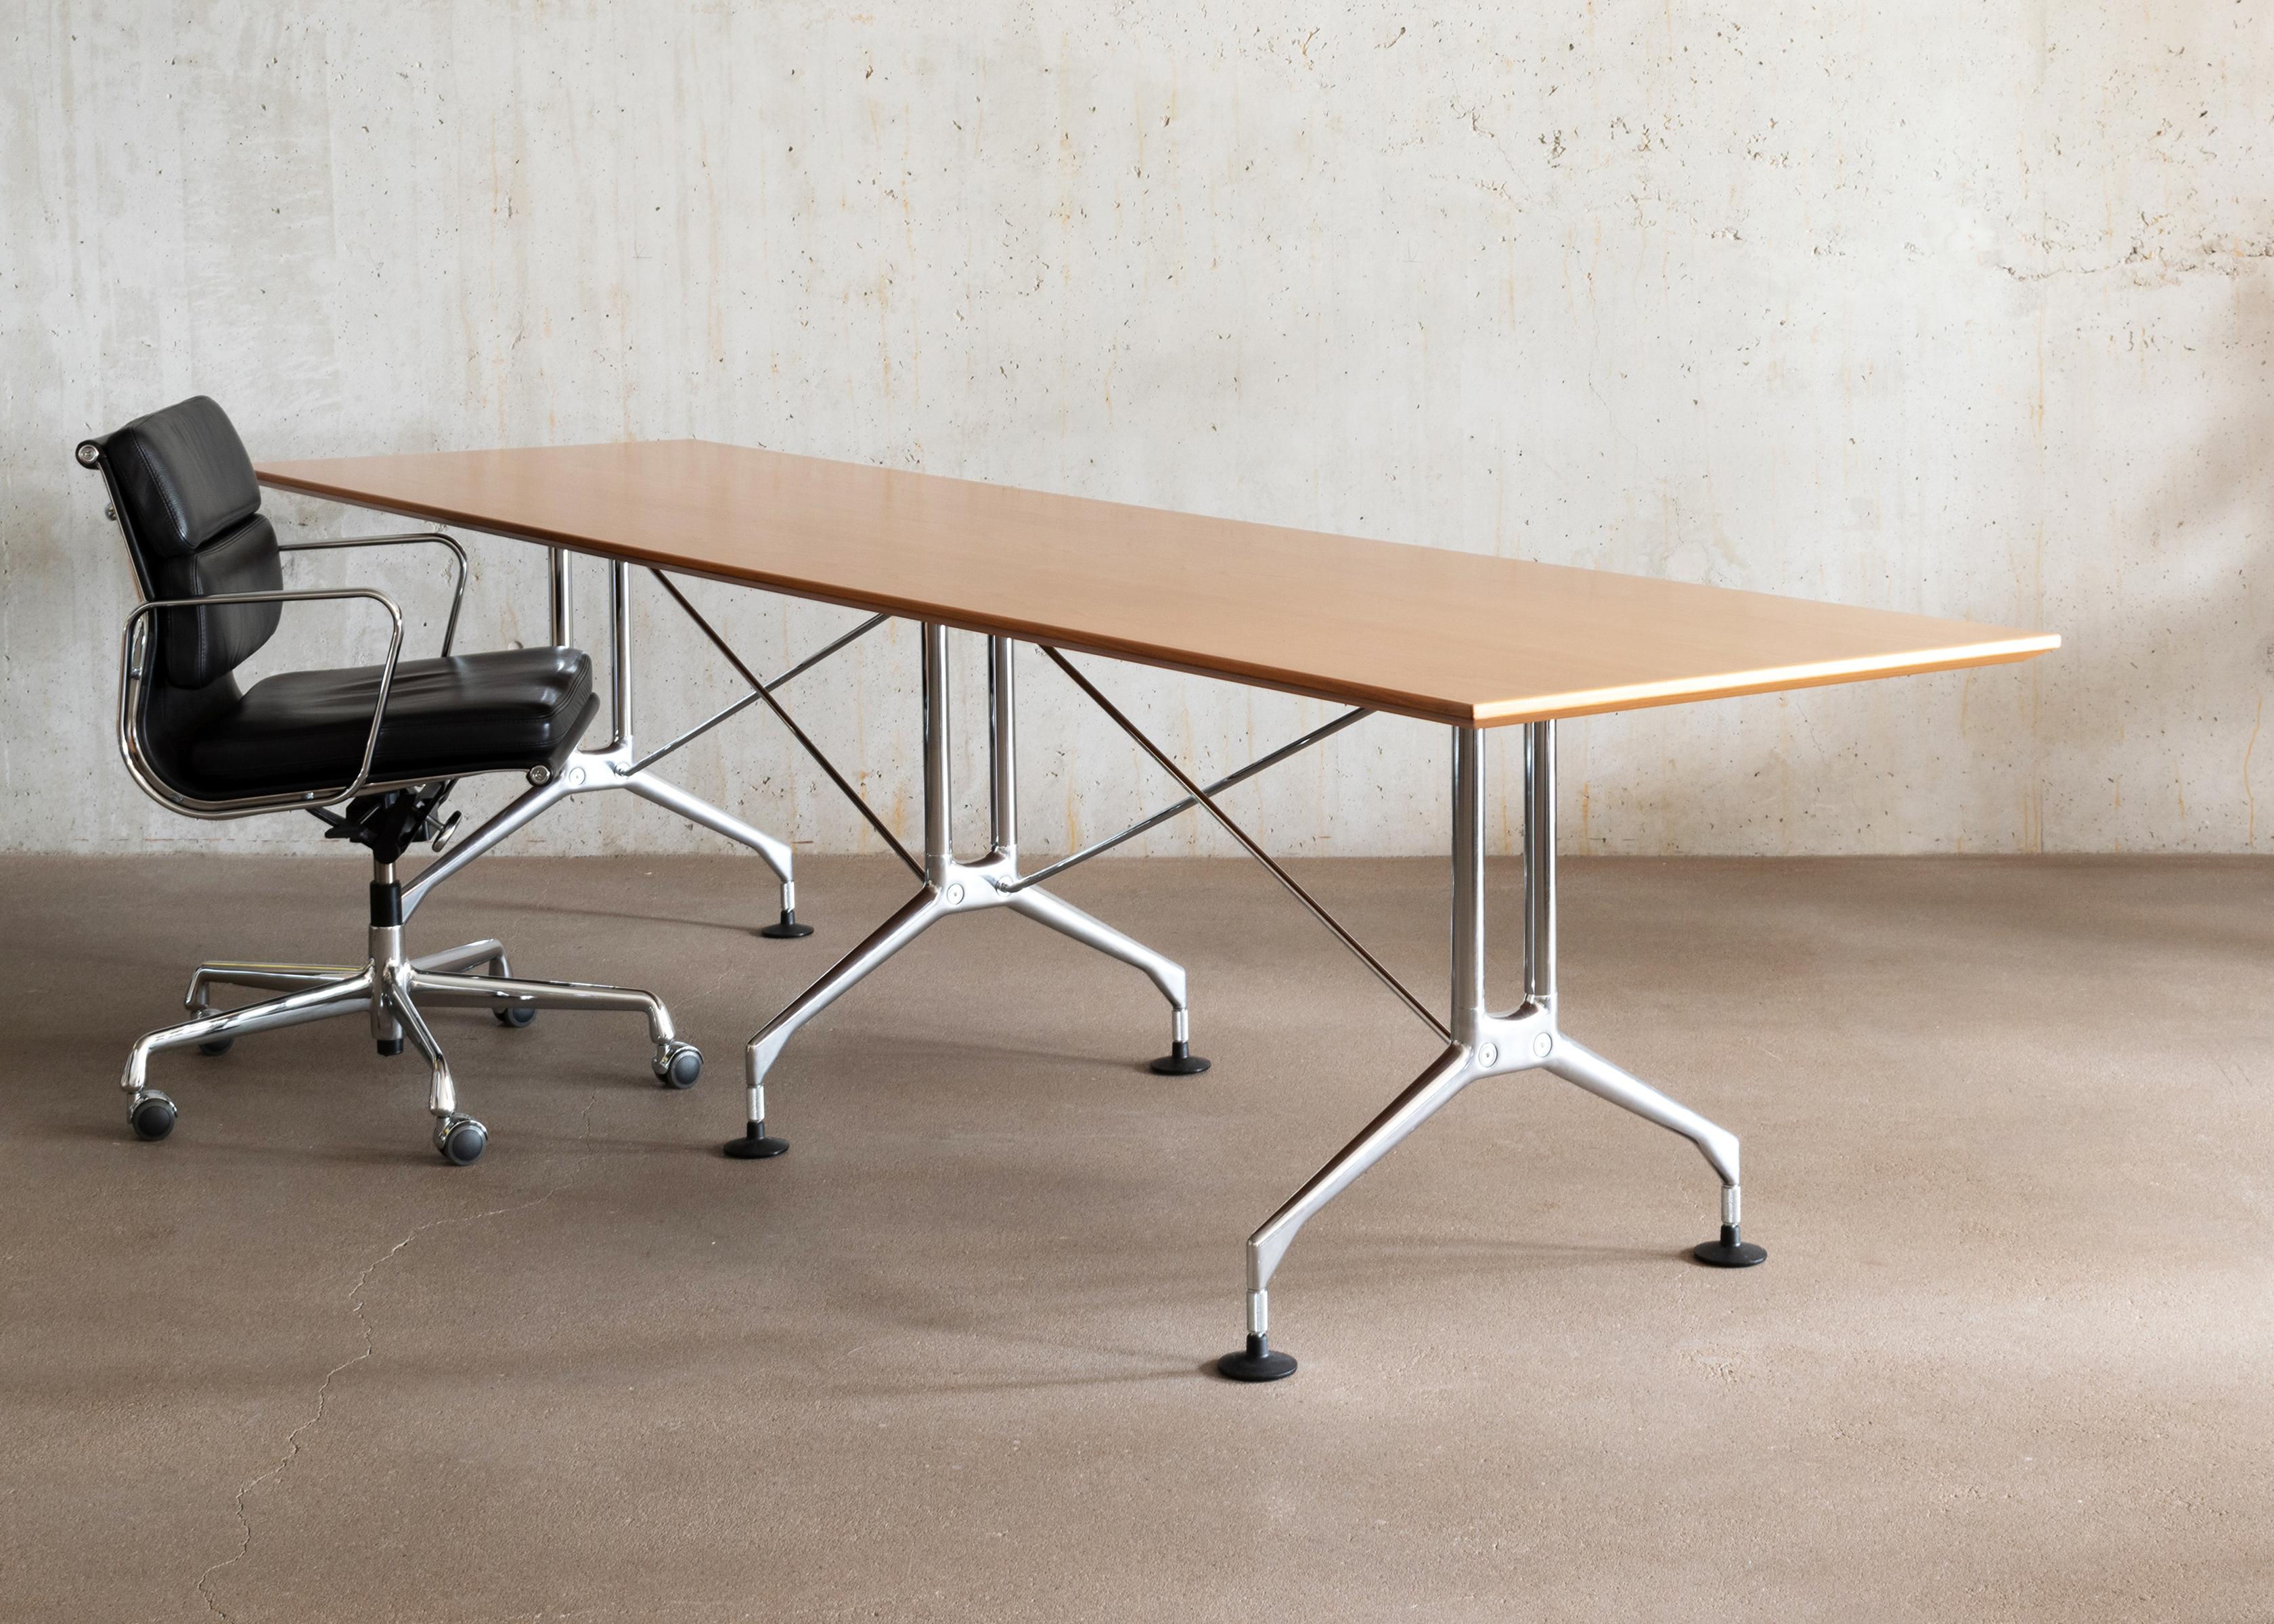 Antonio Citterio Spatio conference, office or desk table in oak veneer and chrome plated steel for Vitra.
Table is in very good condition with light wear, mainly around the edges.